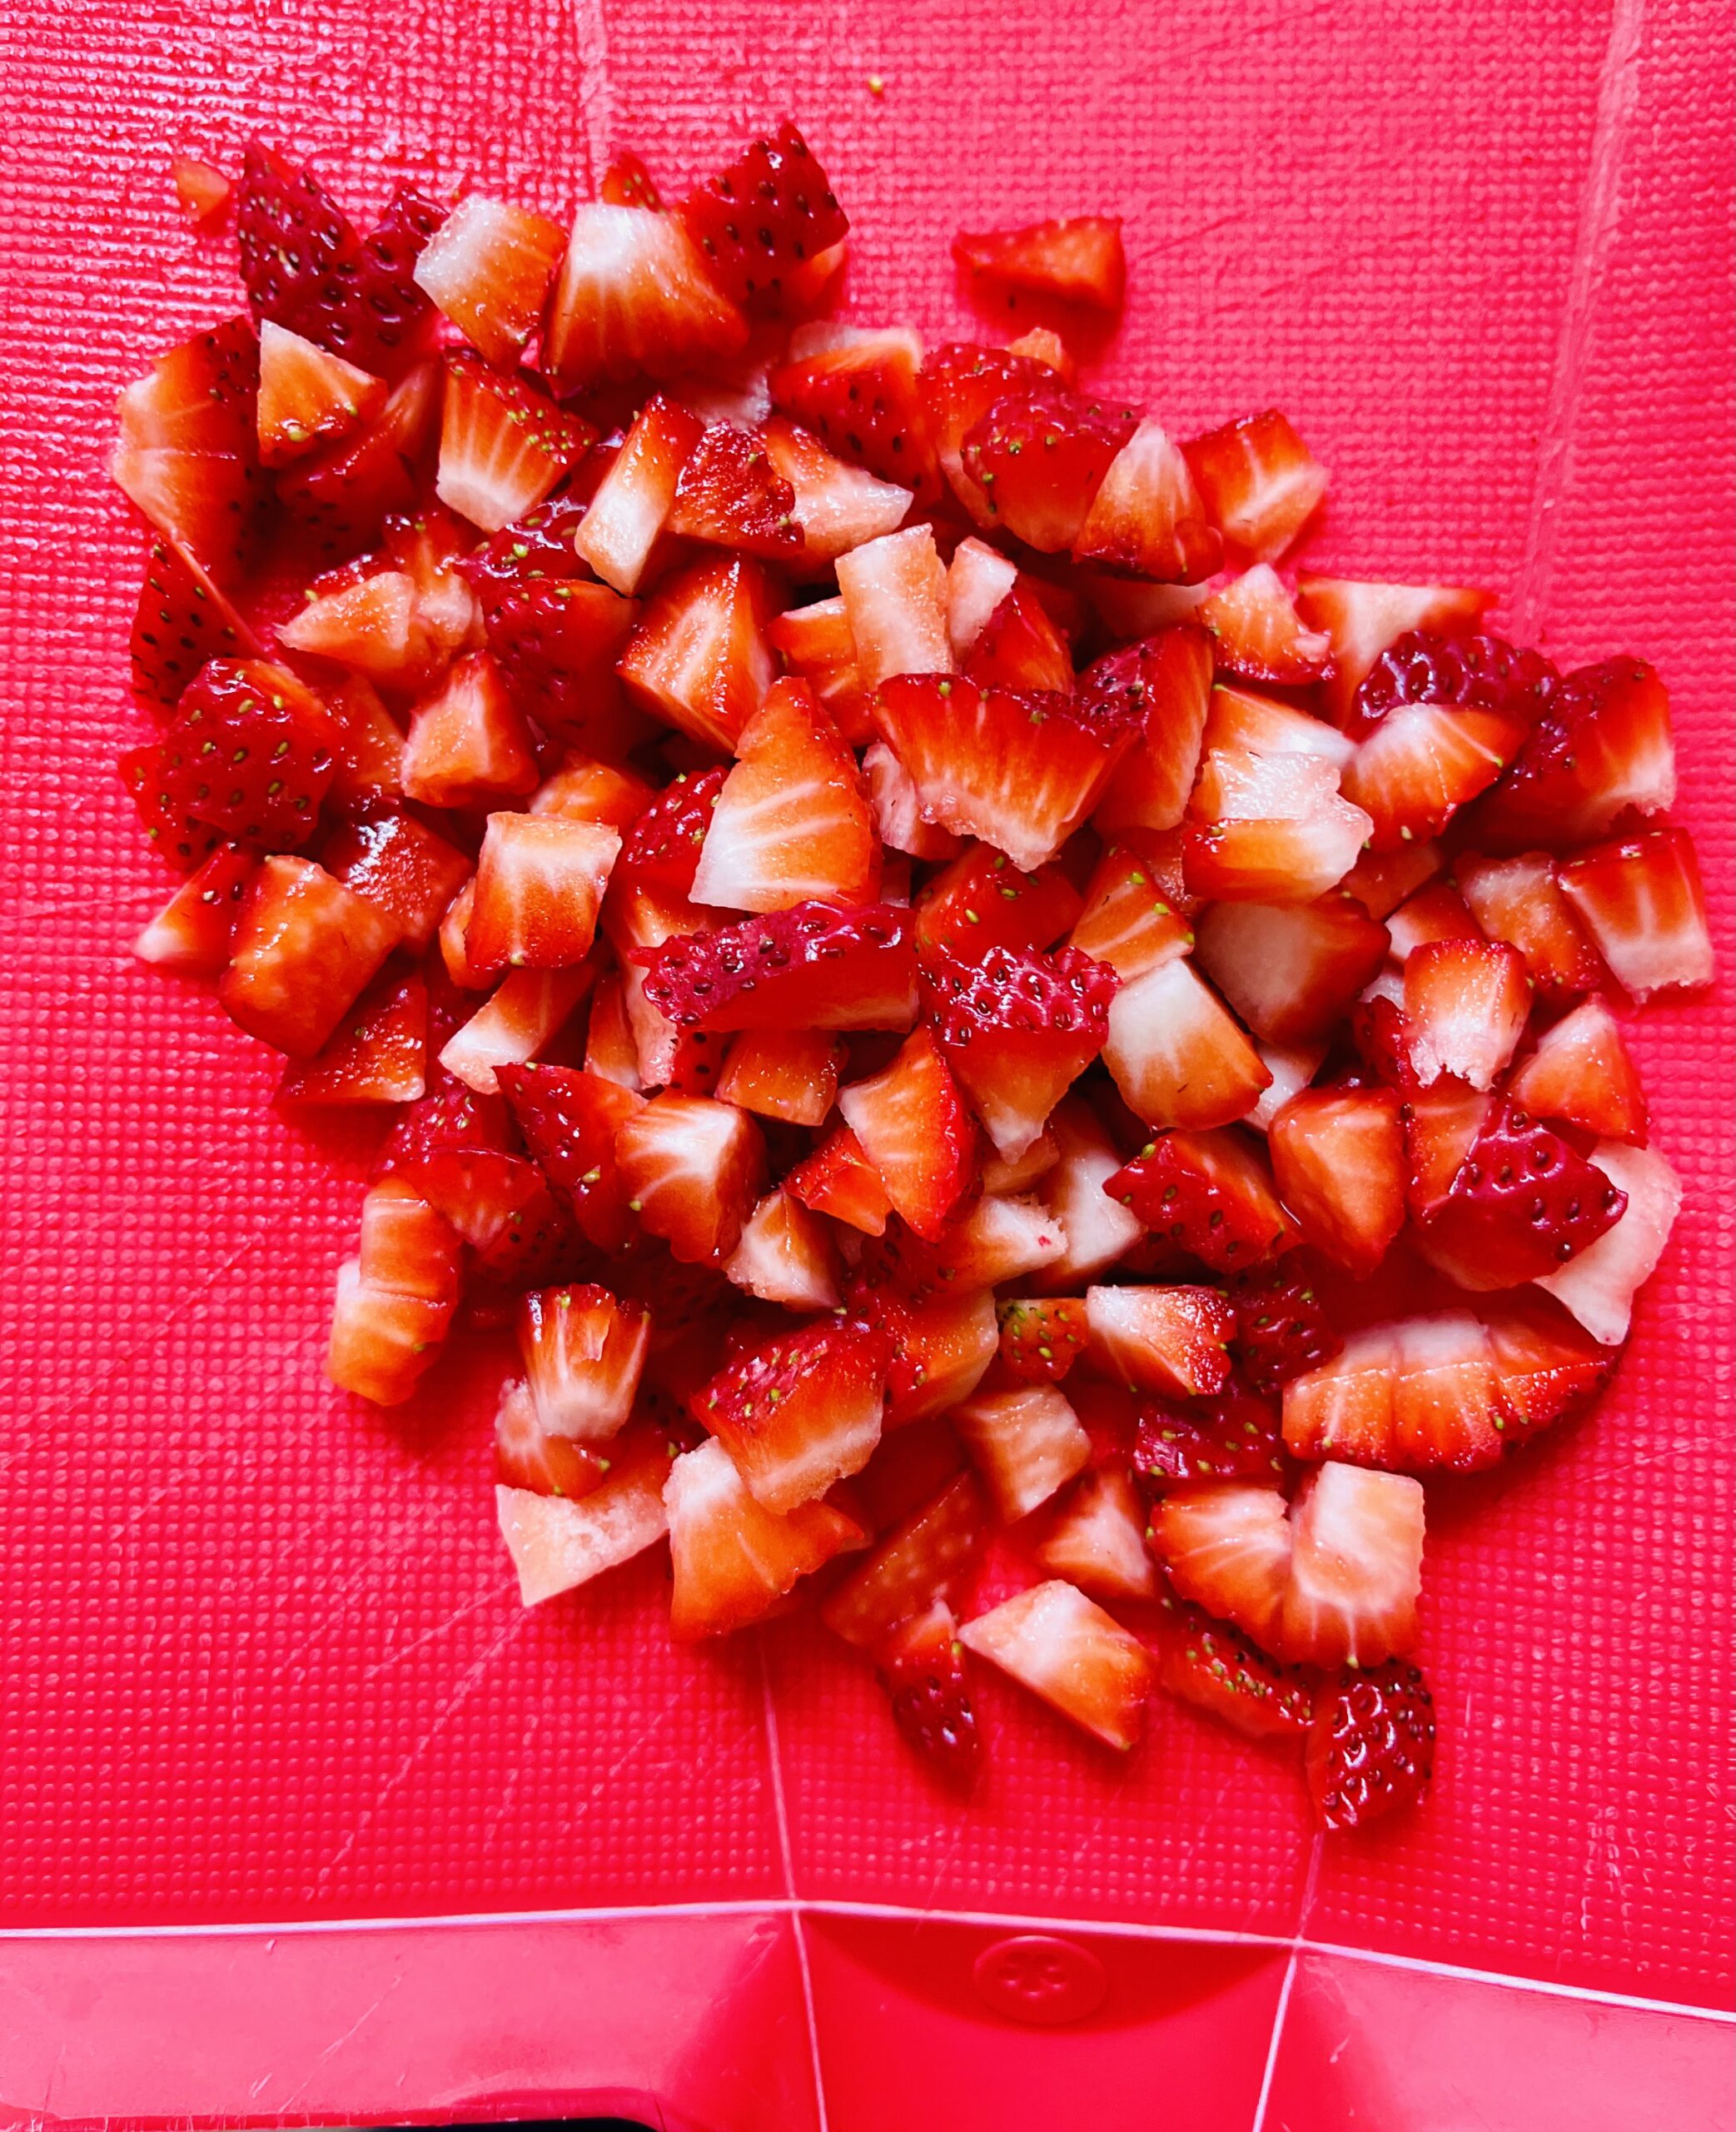 diced strawberries for strawberry no churn ice cream